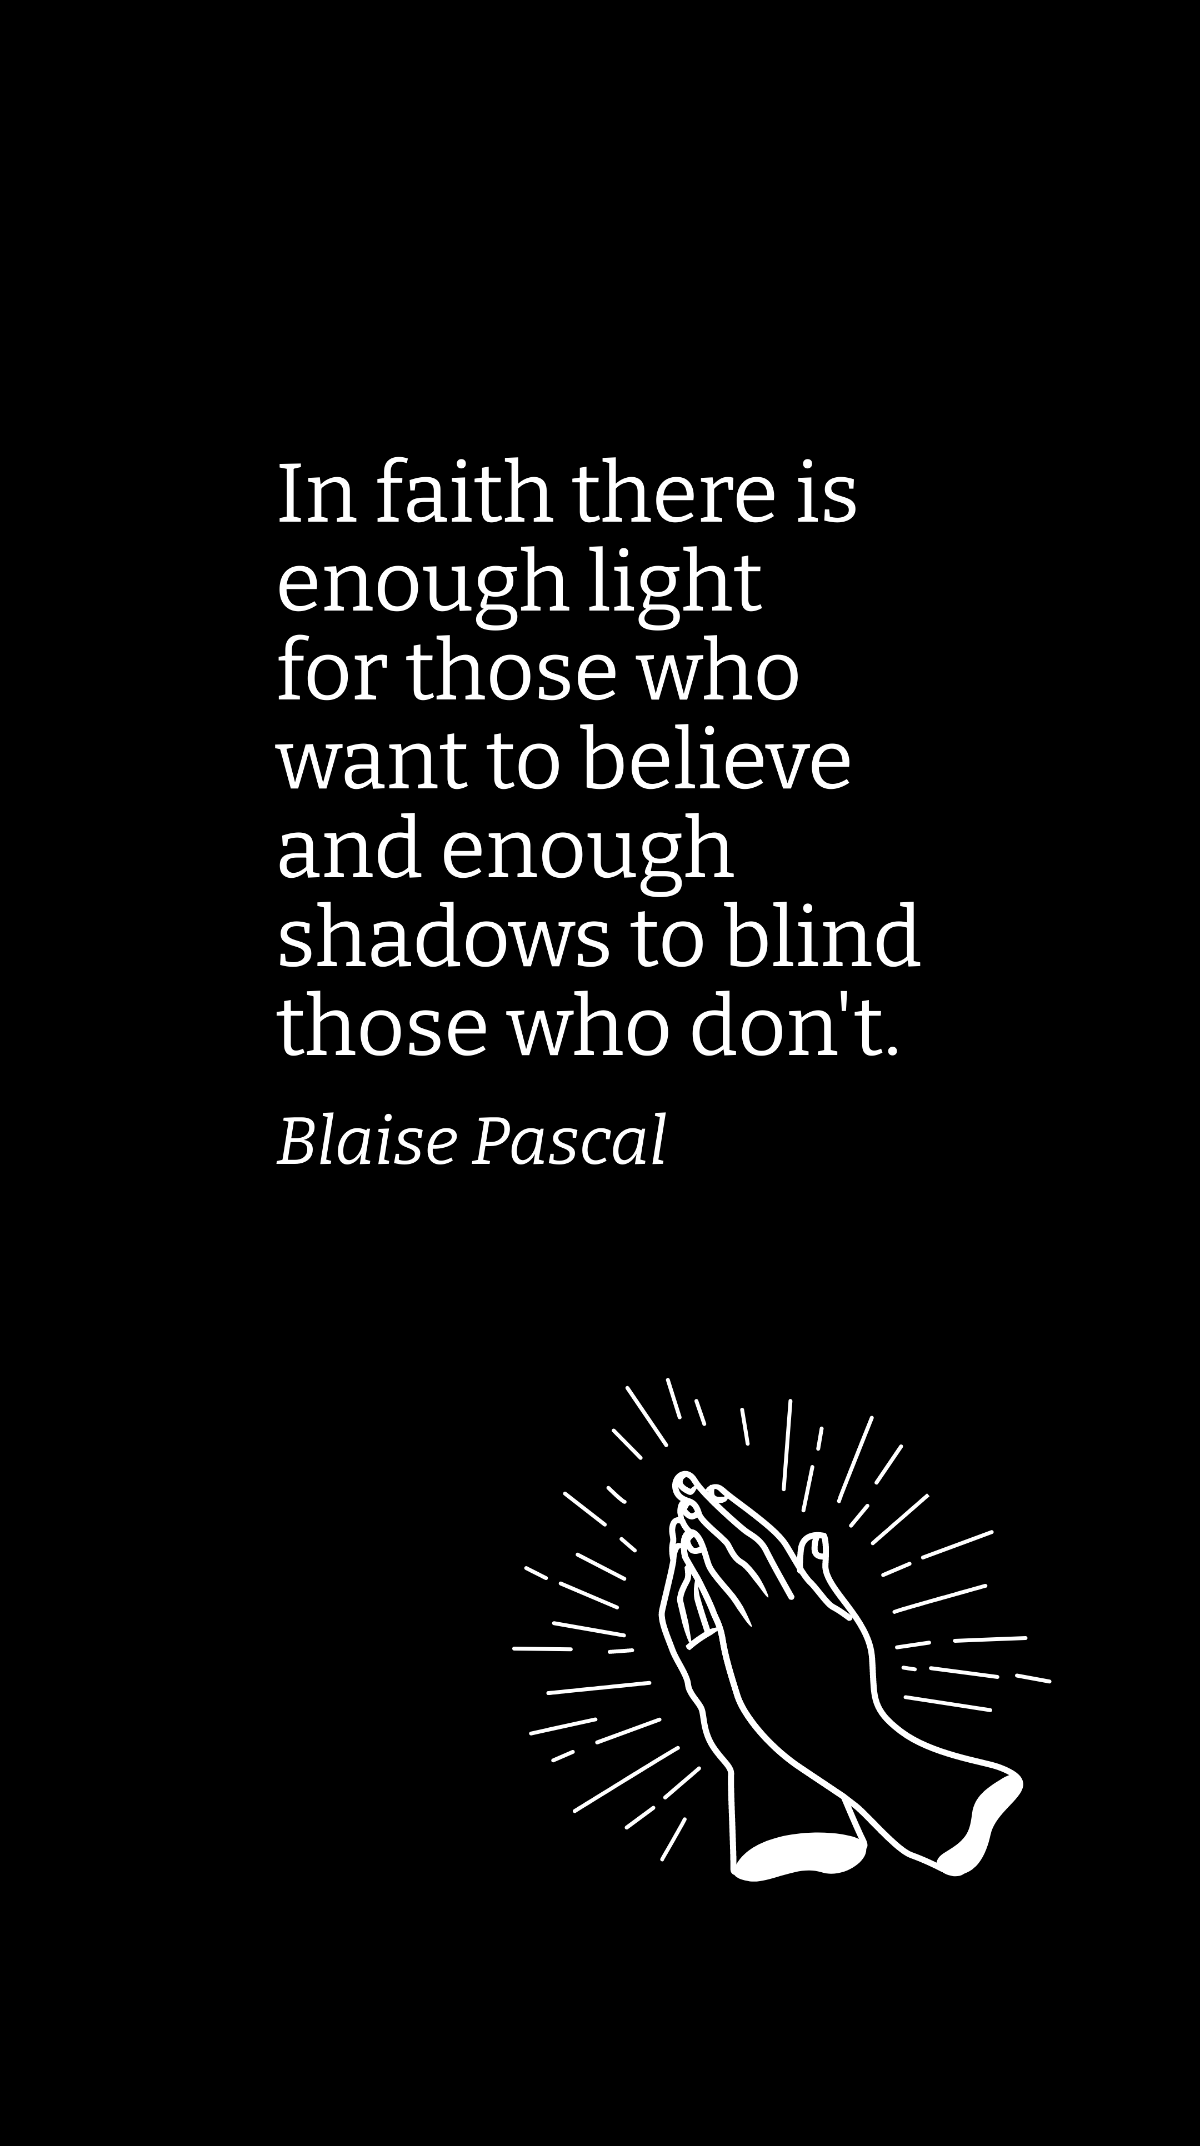 Blaise Pascal - In faith there is enough light for those who want to believe and enough shadows to blind those who don't. Template